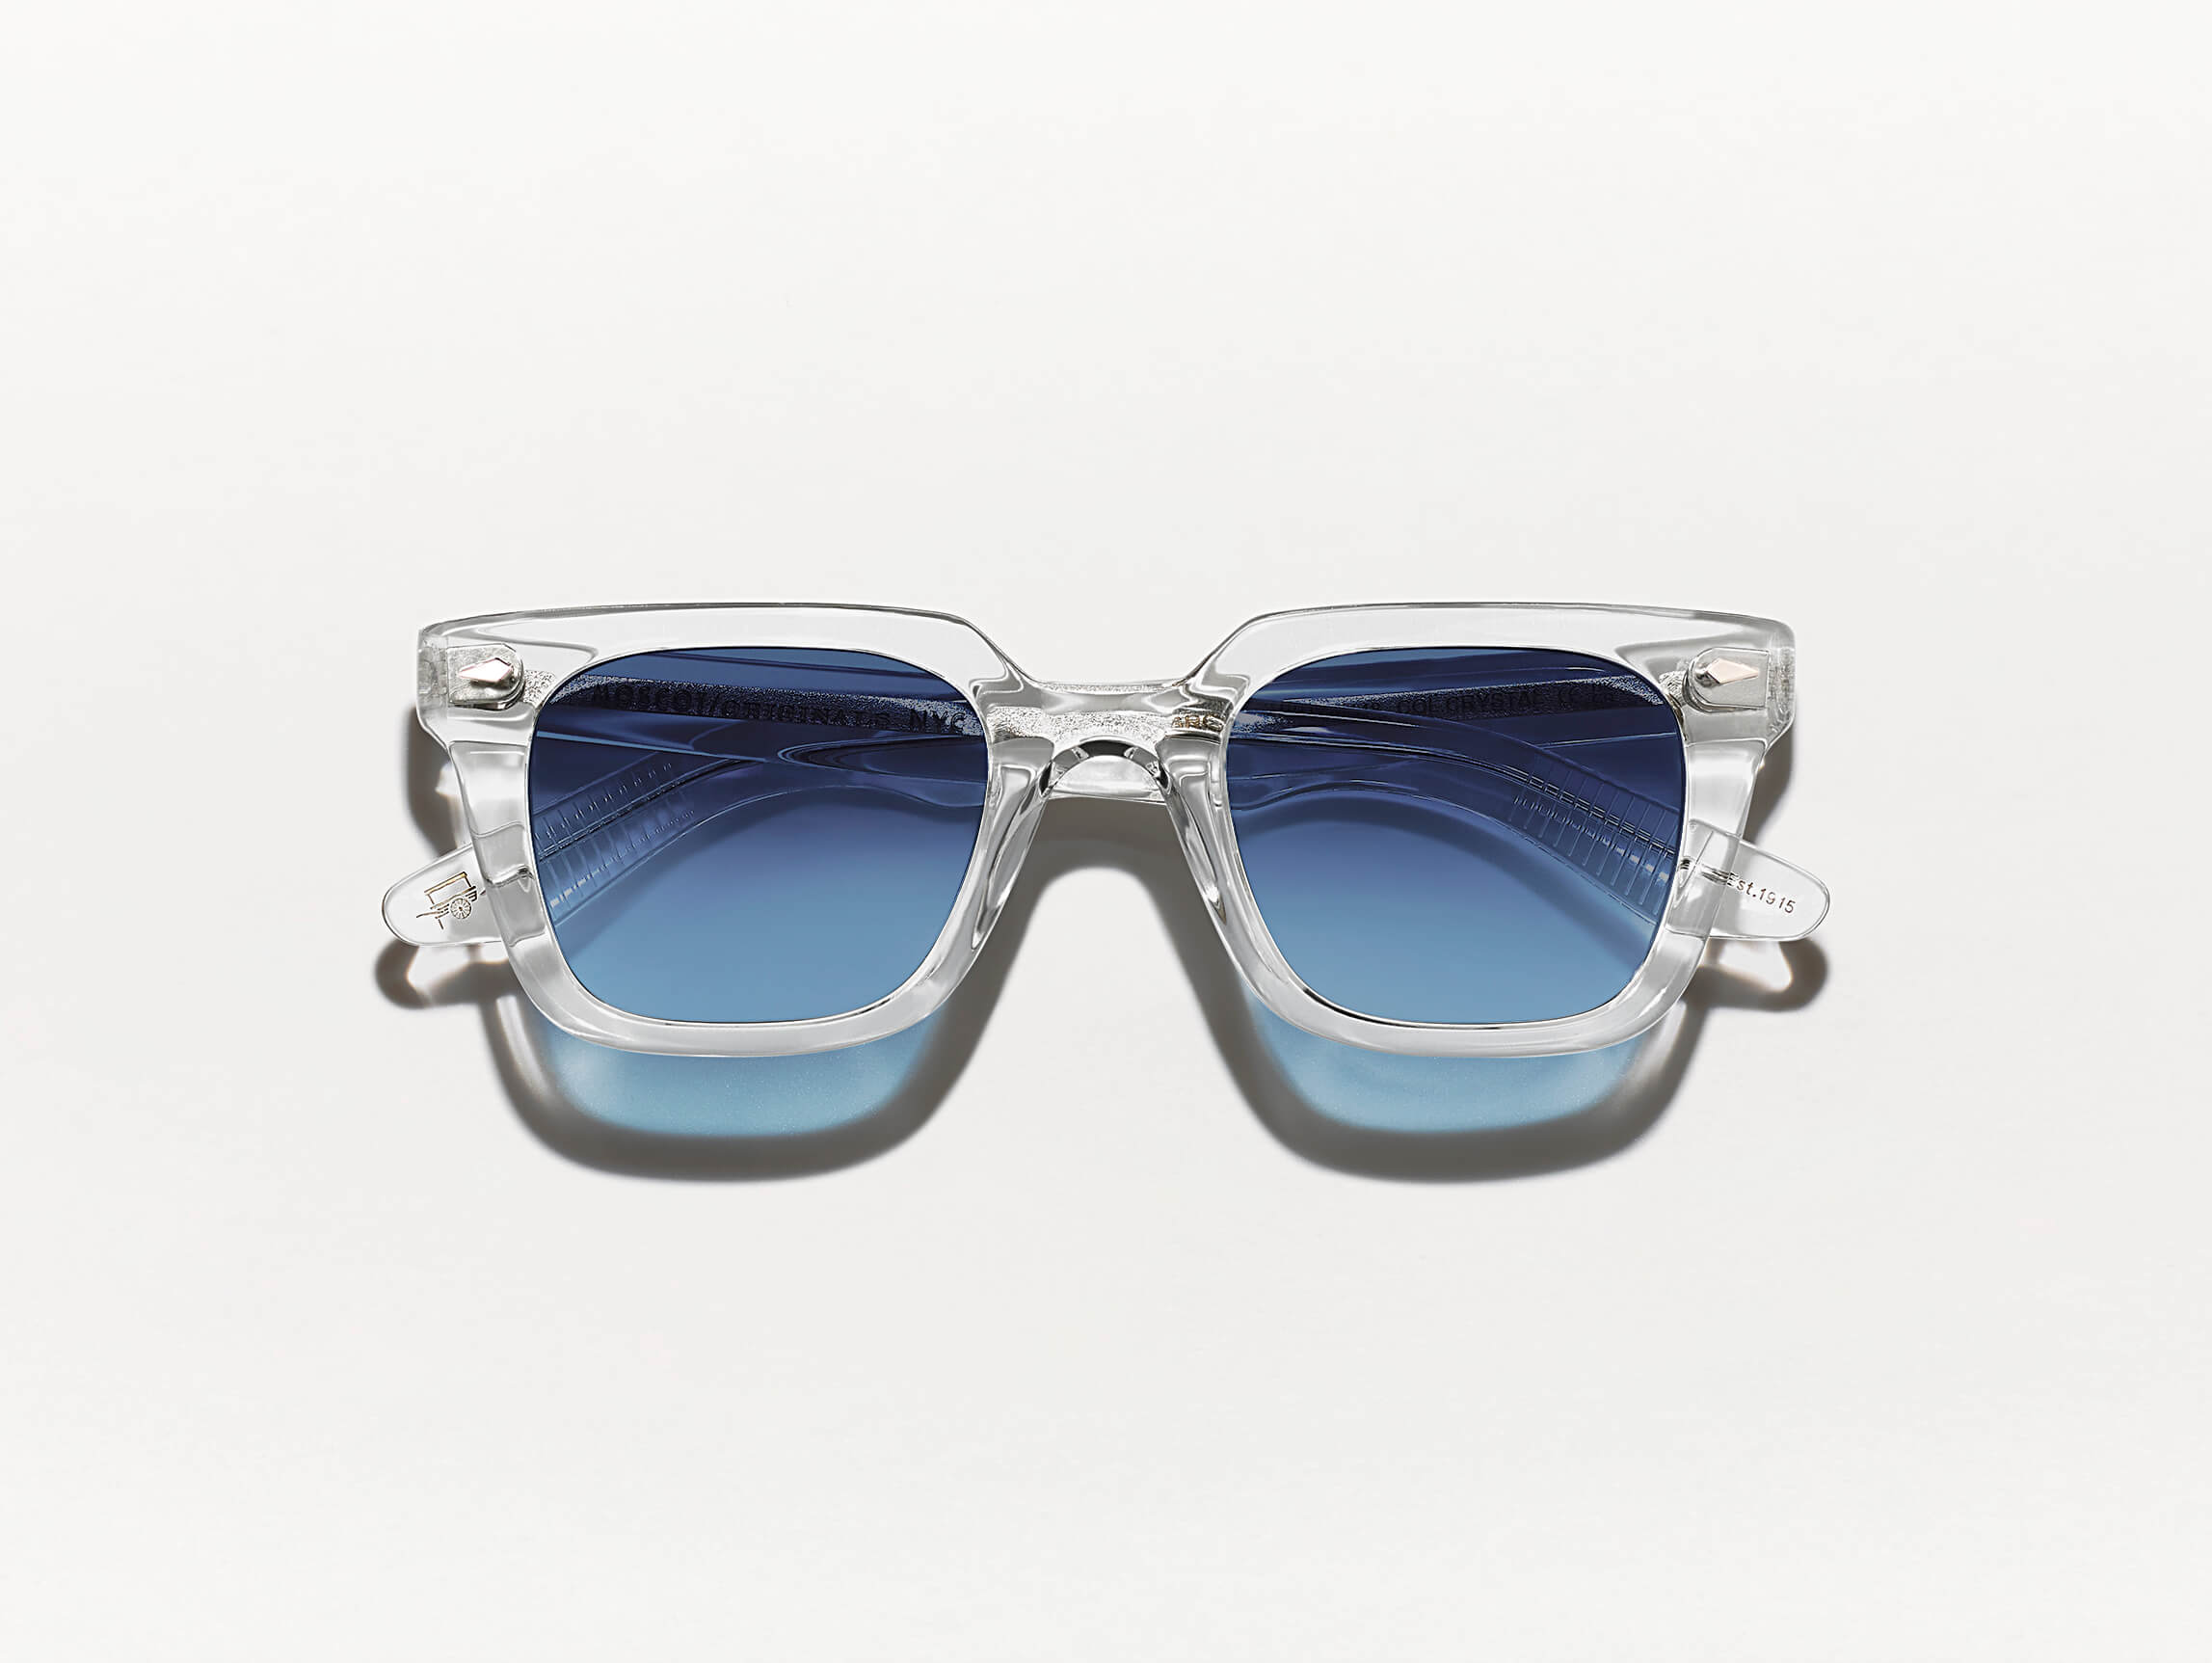 The GROBER SUN in Crystal with Denim Blue Tinted Lenses